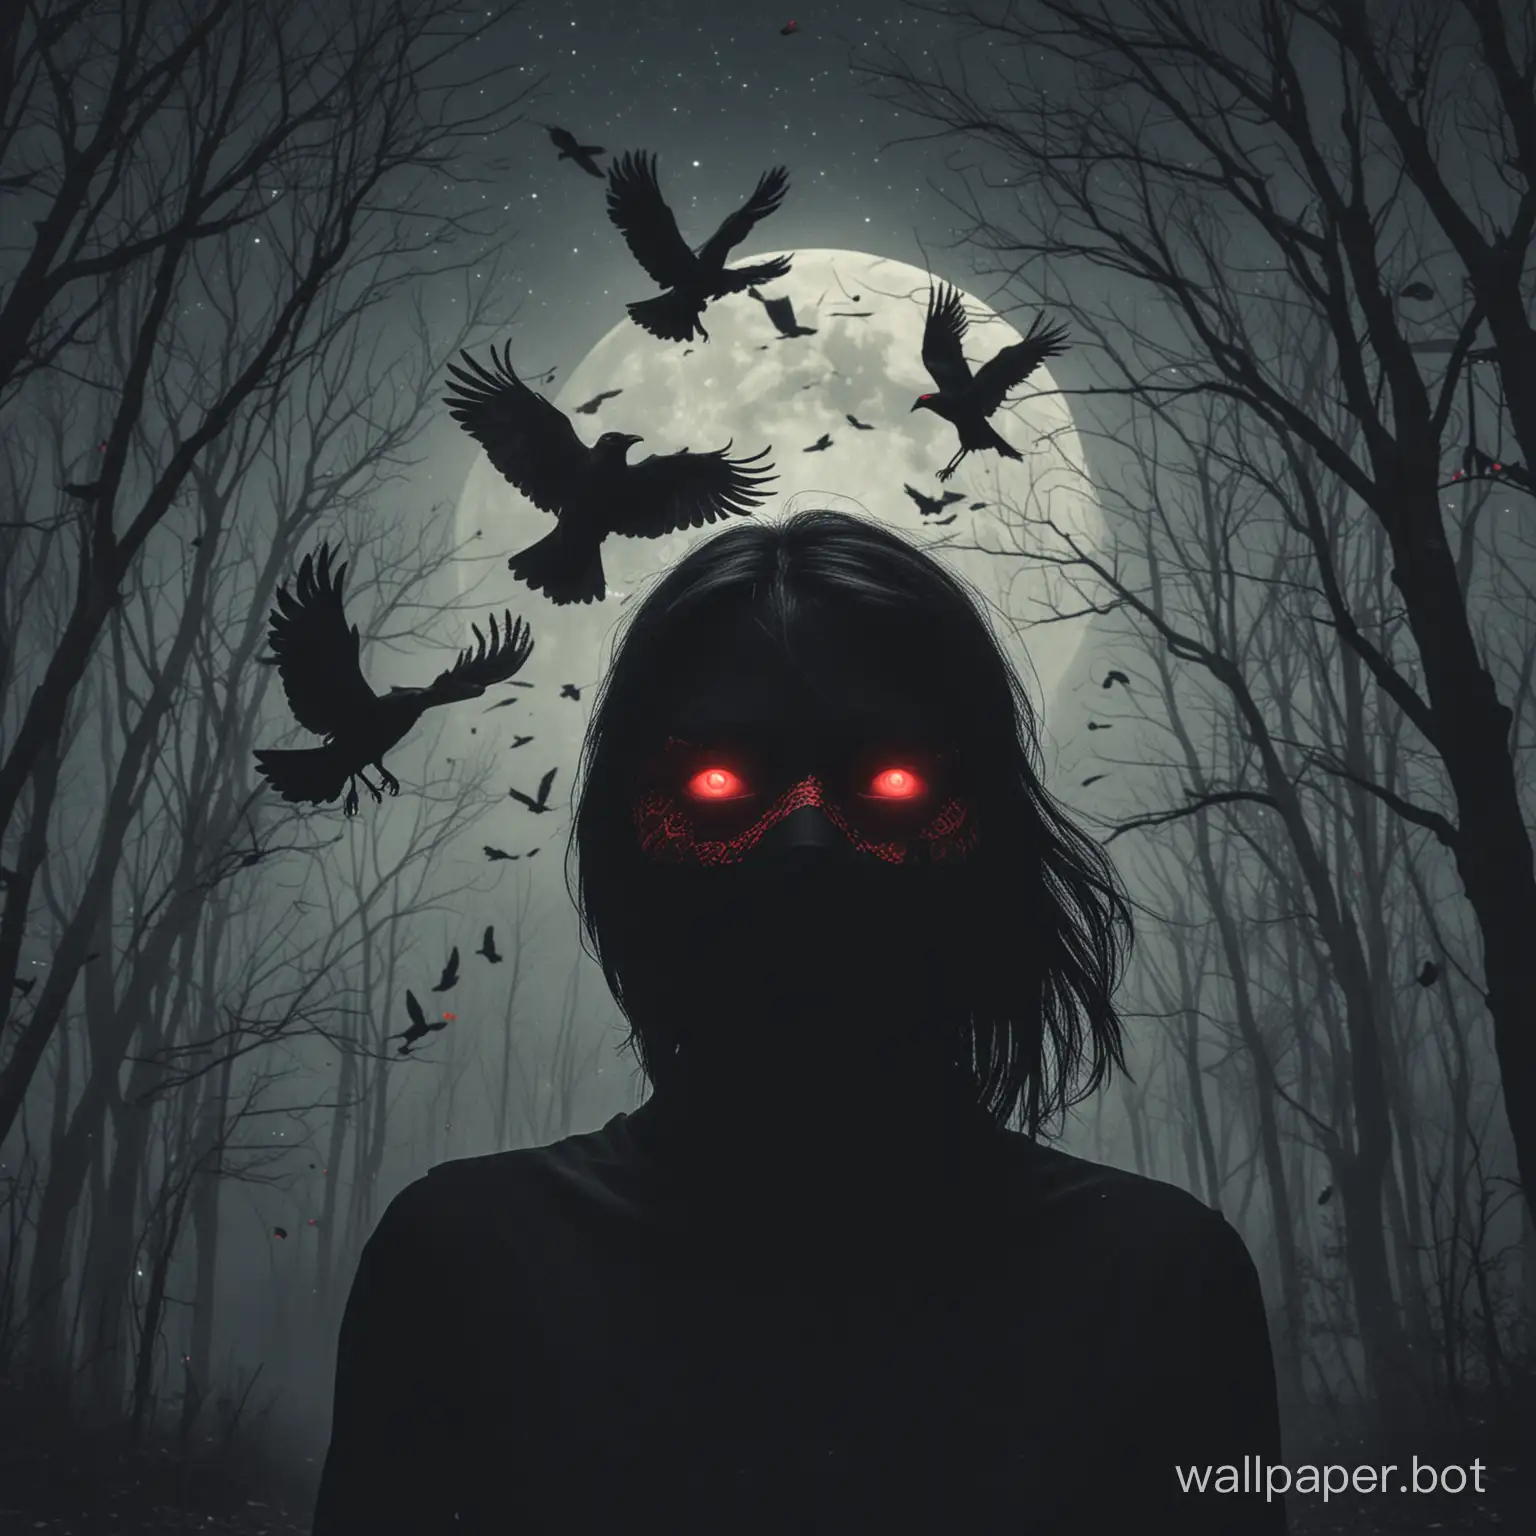 Mysterious-Figure-with-Red-Eyes-Wearing-a-Short-Mask-Under-Night-Sky-with-Flying-Crows